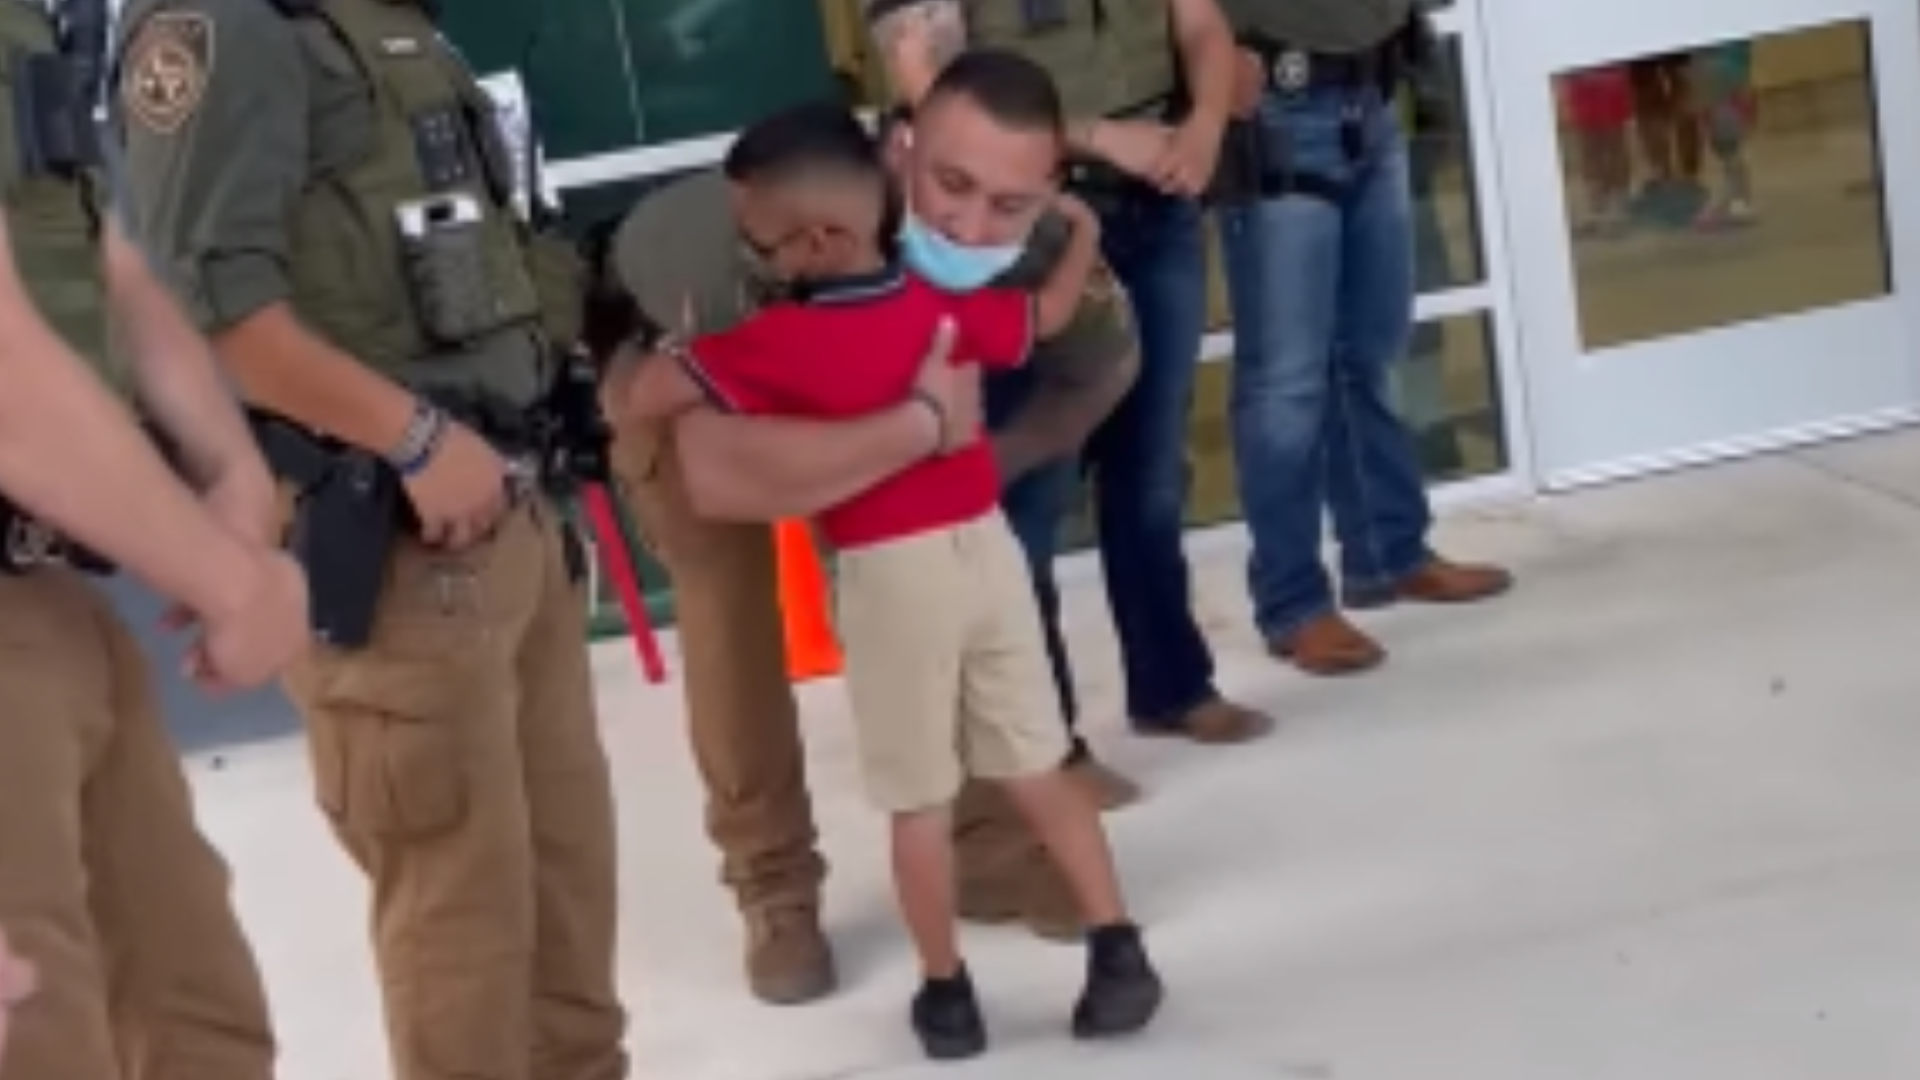 A tender moment caught on camera, shows "Jr. Deputy Joziah Longoria" shaking hands and hugging his late father's fellow deputies on his first day of school.